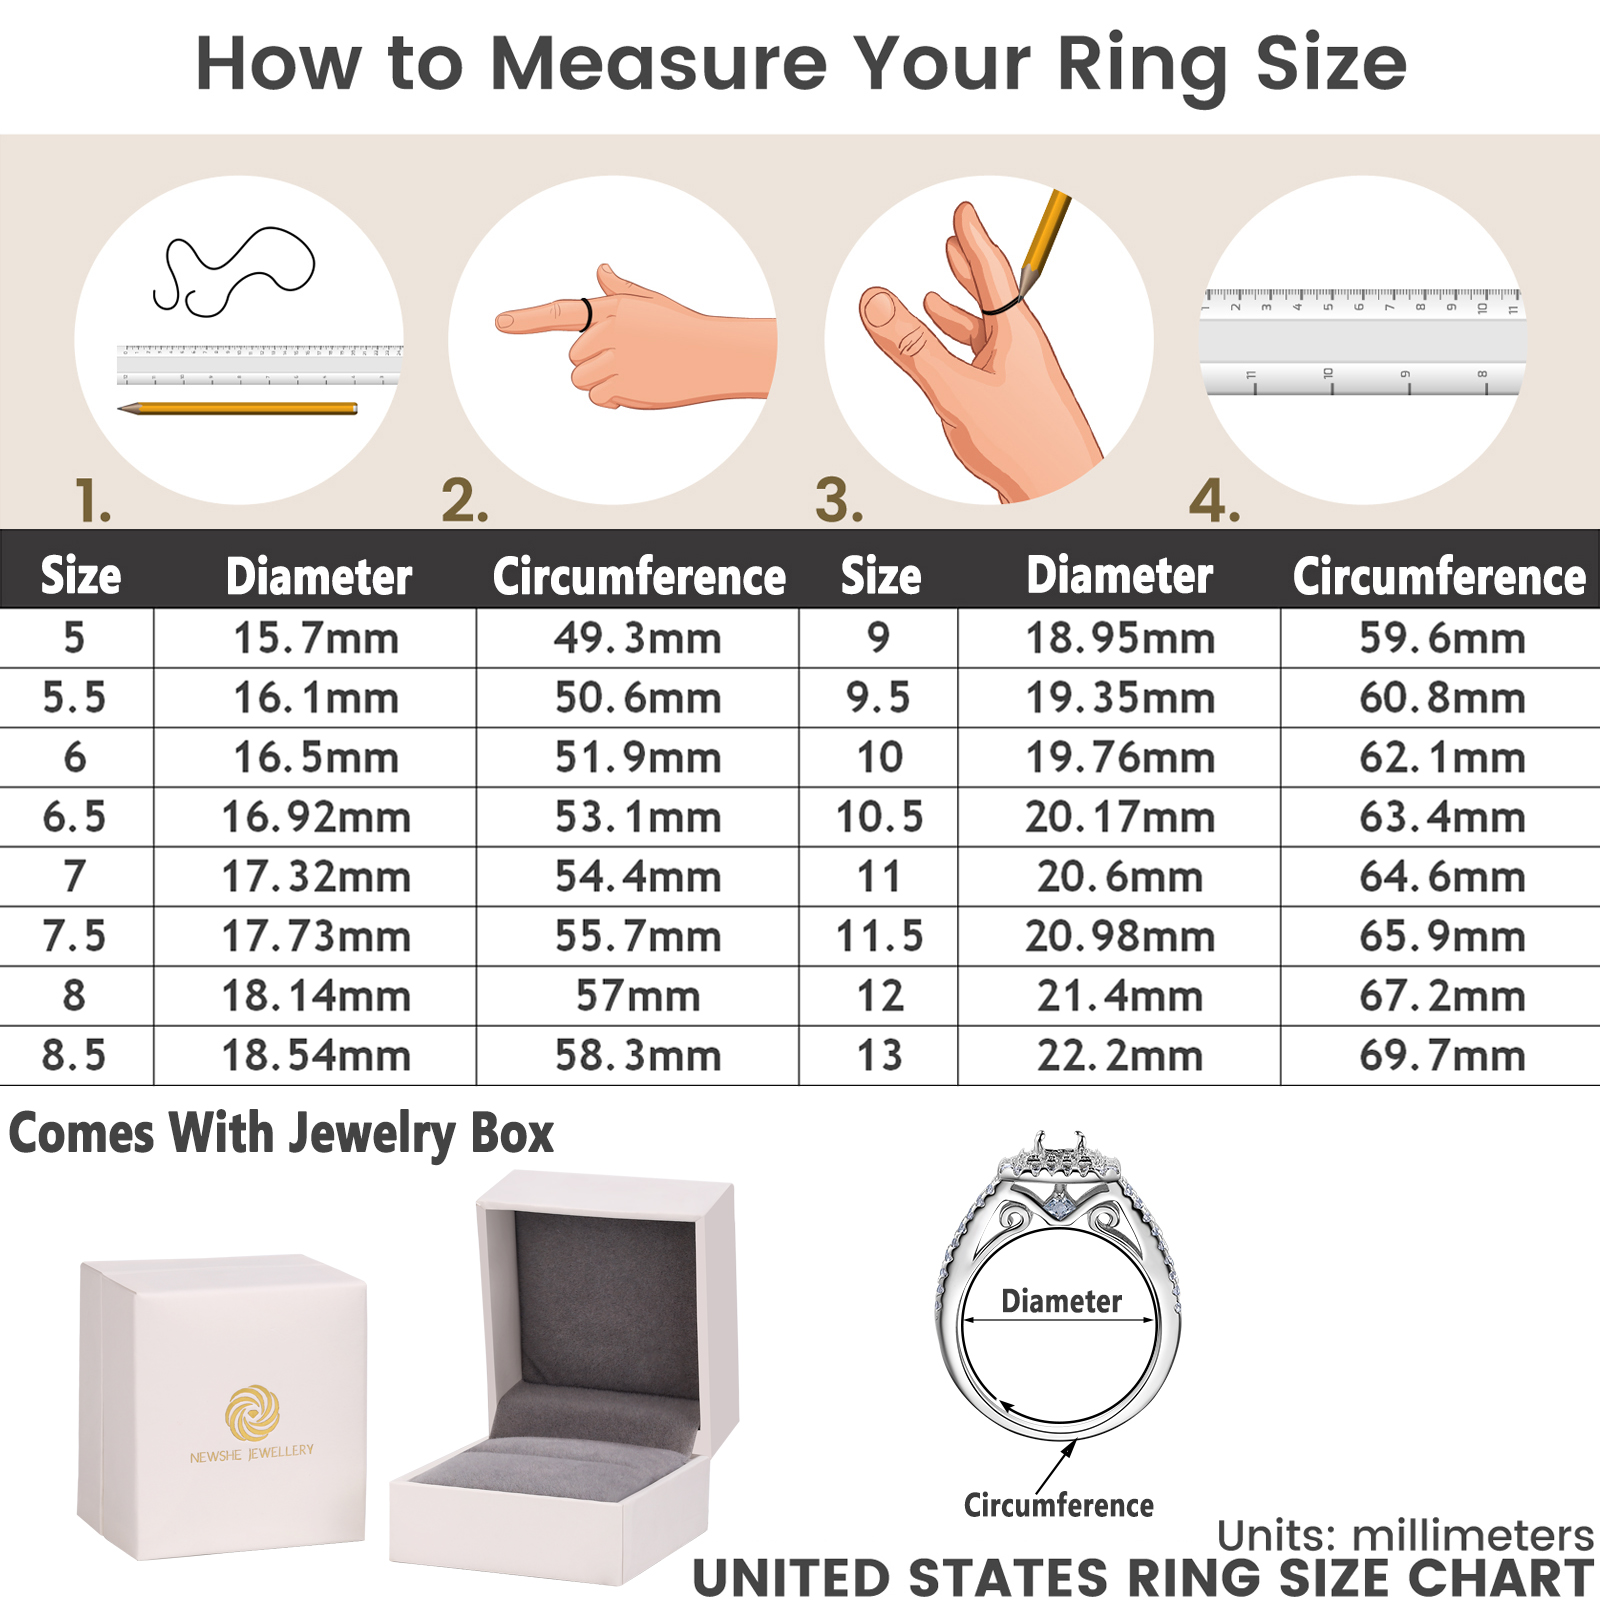 Newshe Wedding Rings for Women Engagement Ring Enhancer Band Bridal Set Sterling Silver 1.8Ct Cz Size 7 - image 5 of 7